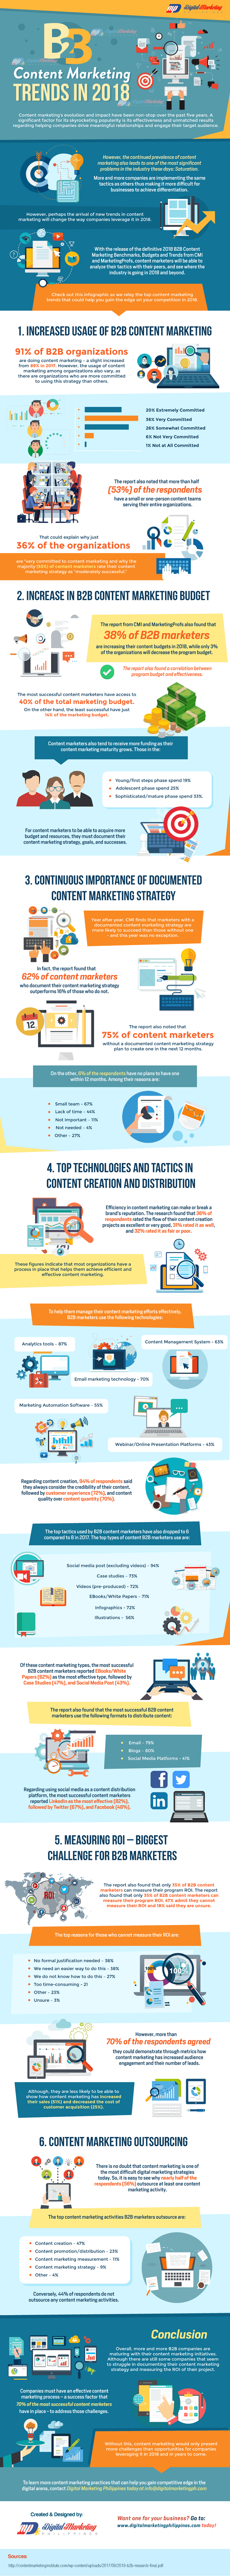 B2B Content Marketing Trends in 2018 Infographic